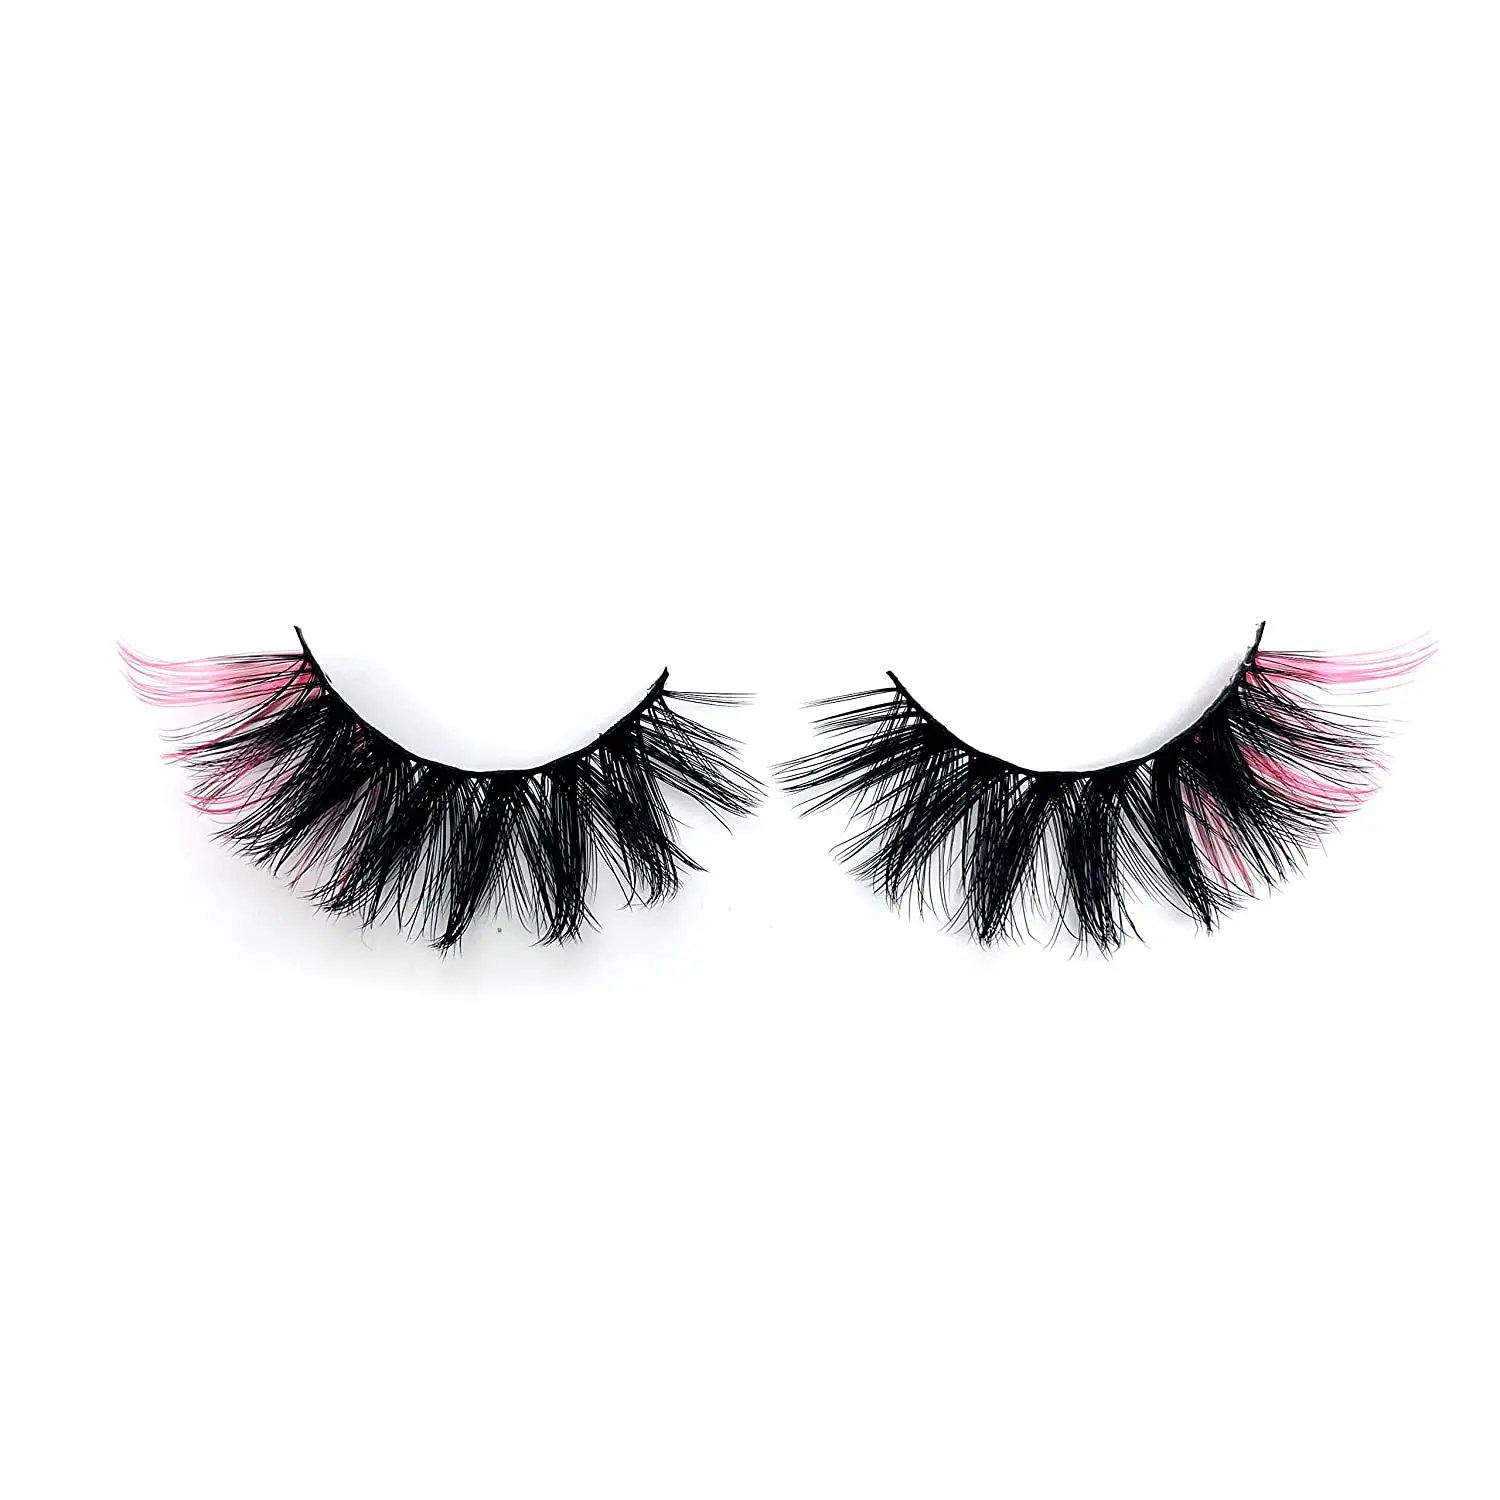 

Wholesale 18mm full russian strip lashes vendor d curl 20mm 3d fluffy two colored mink strip lashes with colors, Natural black faux mink eyelashes